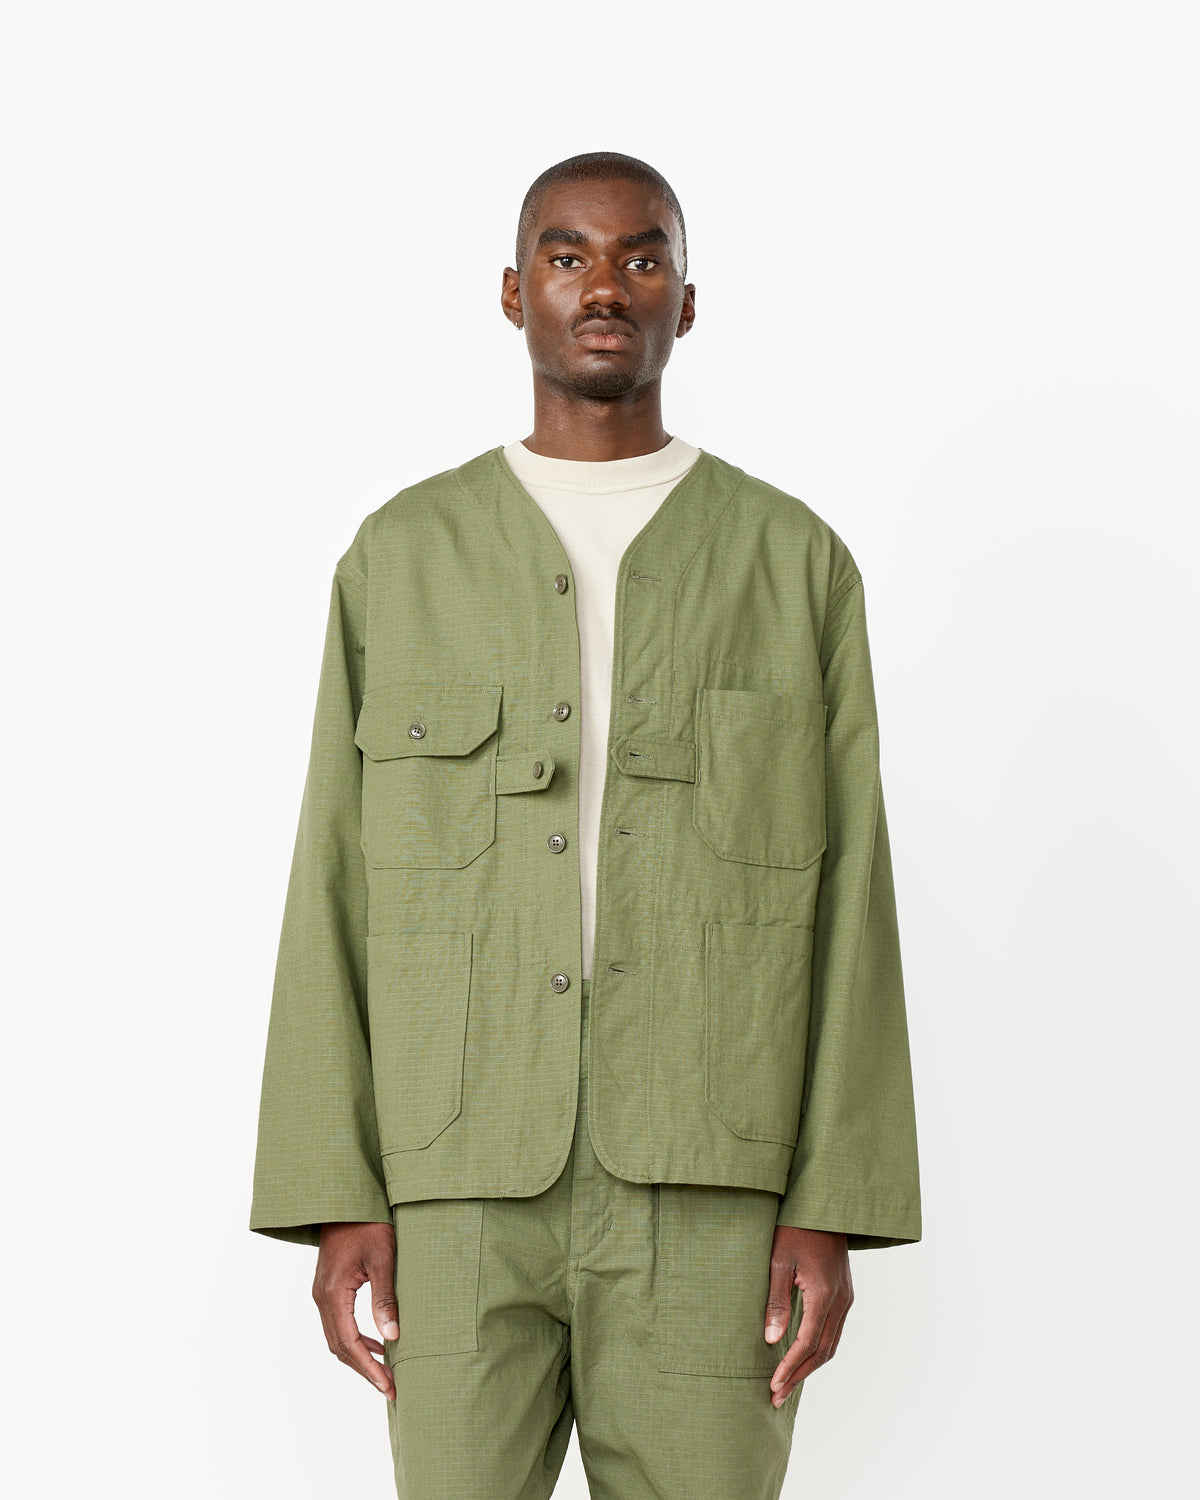 Cardigan Jacket in Olive Engineered Garments Great Value For Money